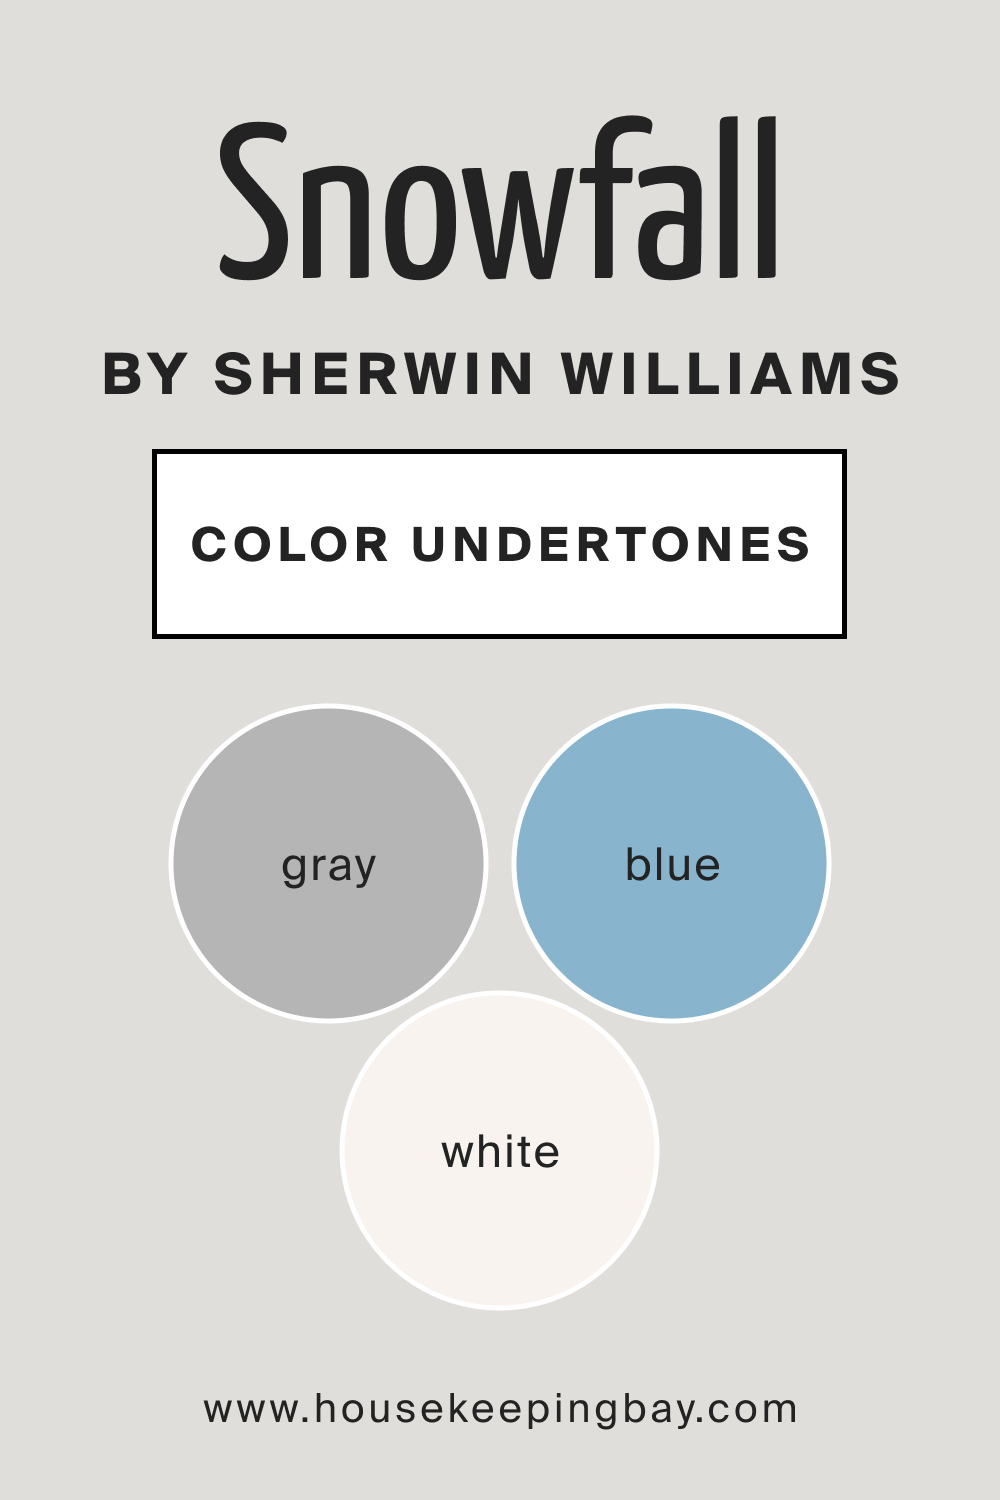 Snowfall by Sherwin Williams Color Undertone